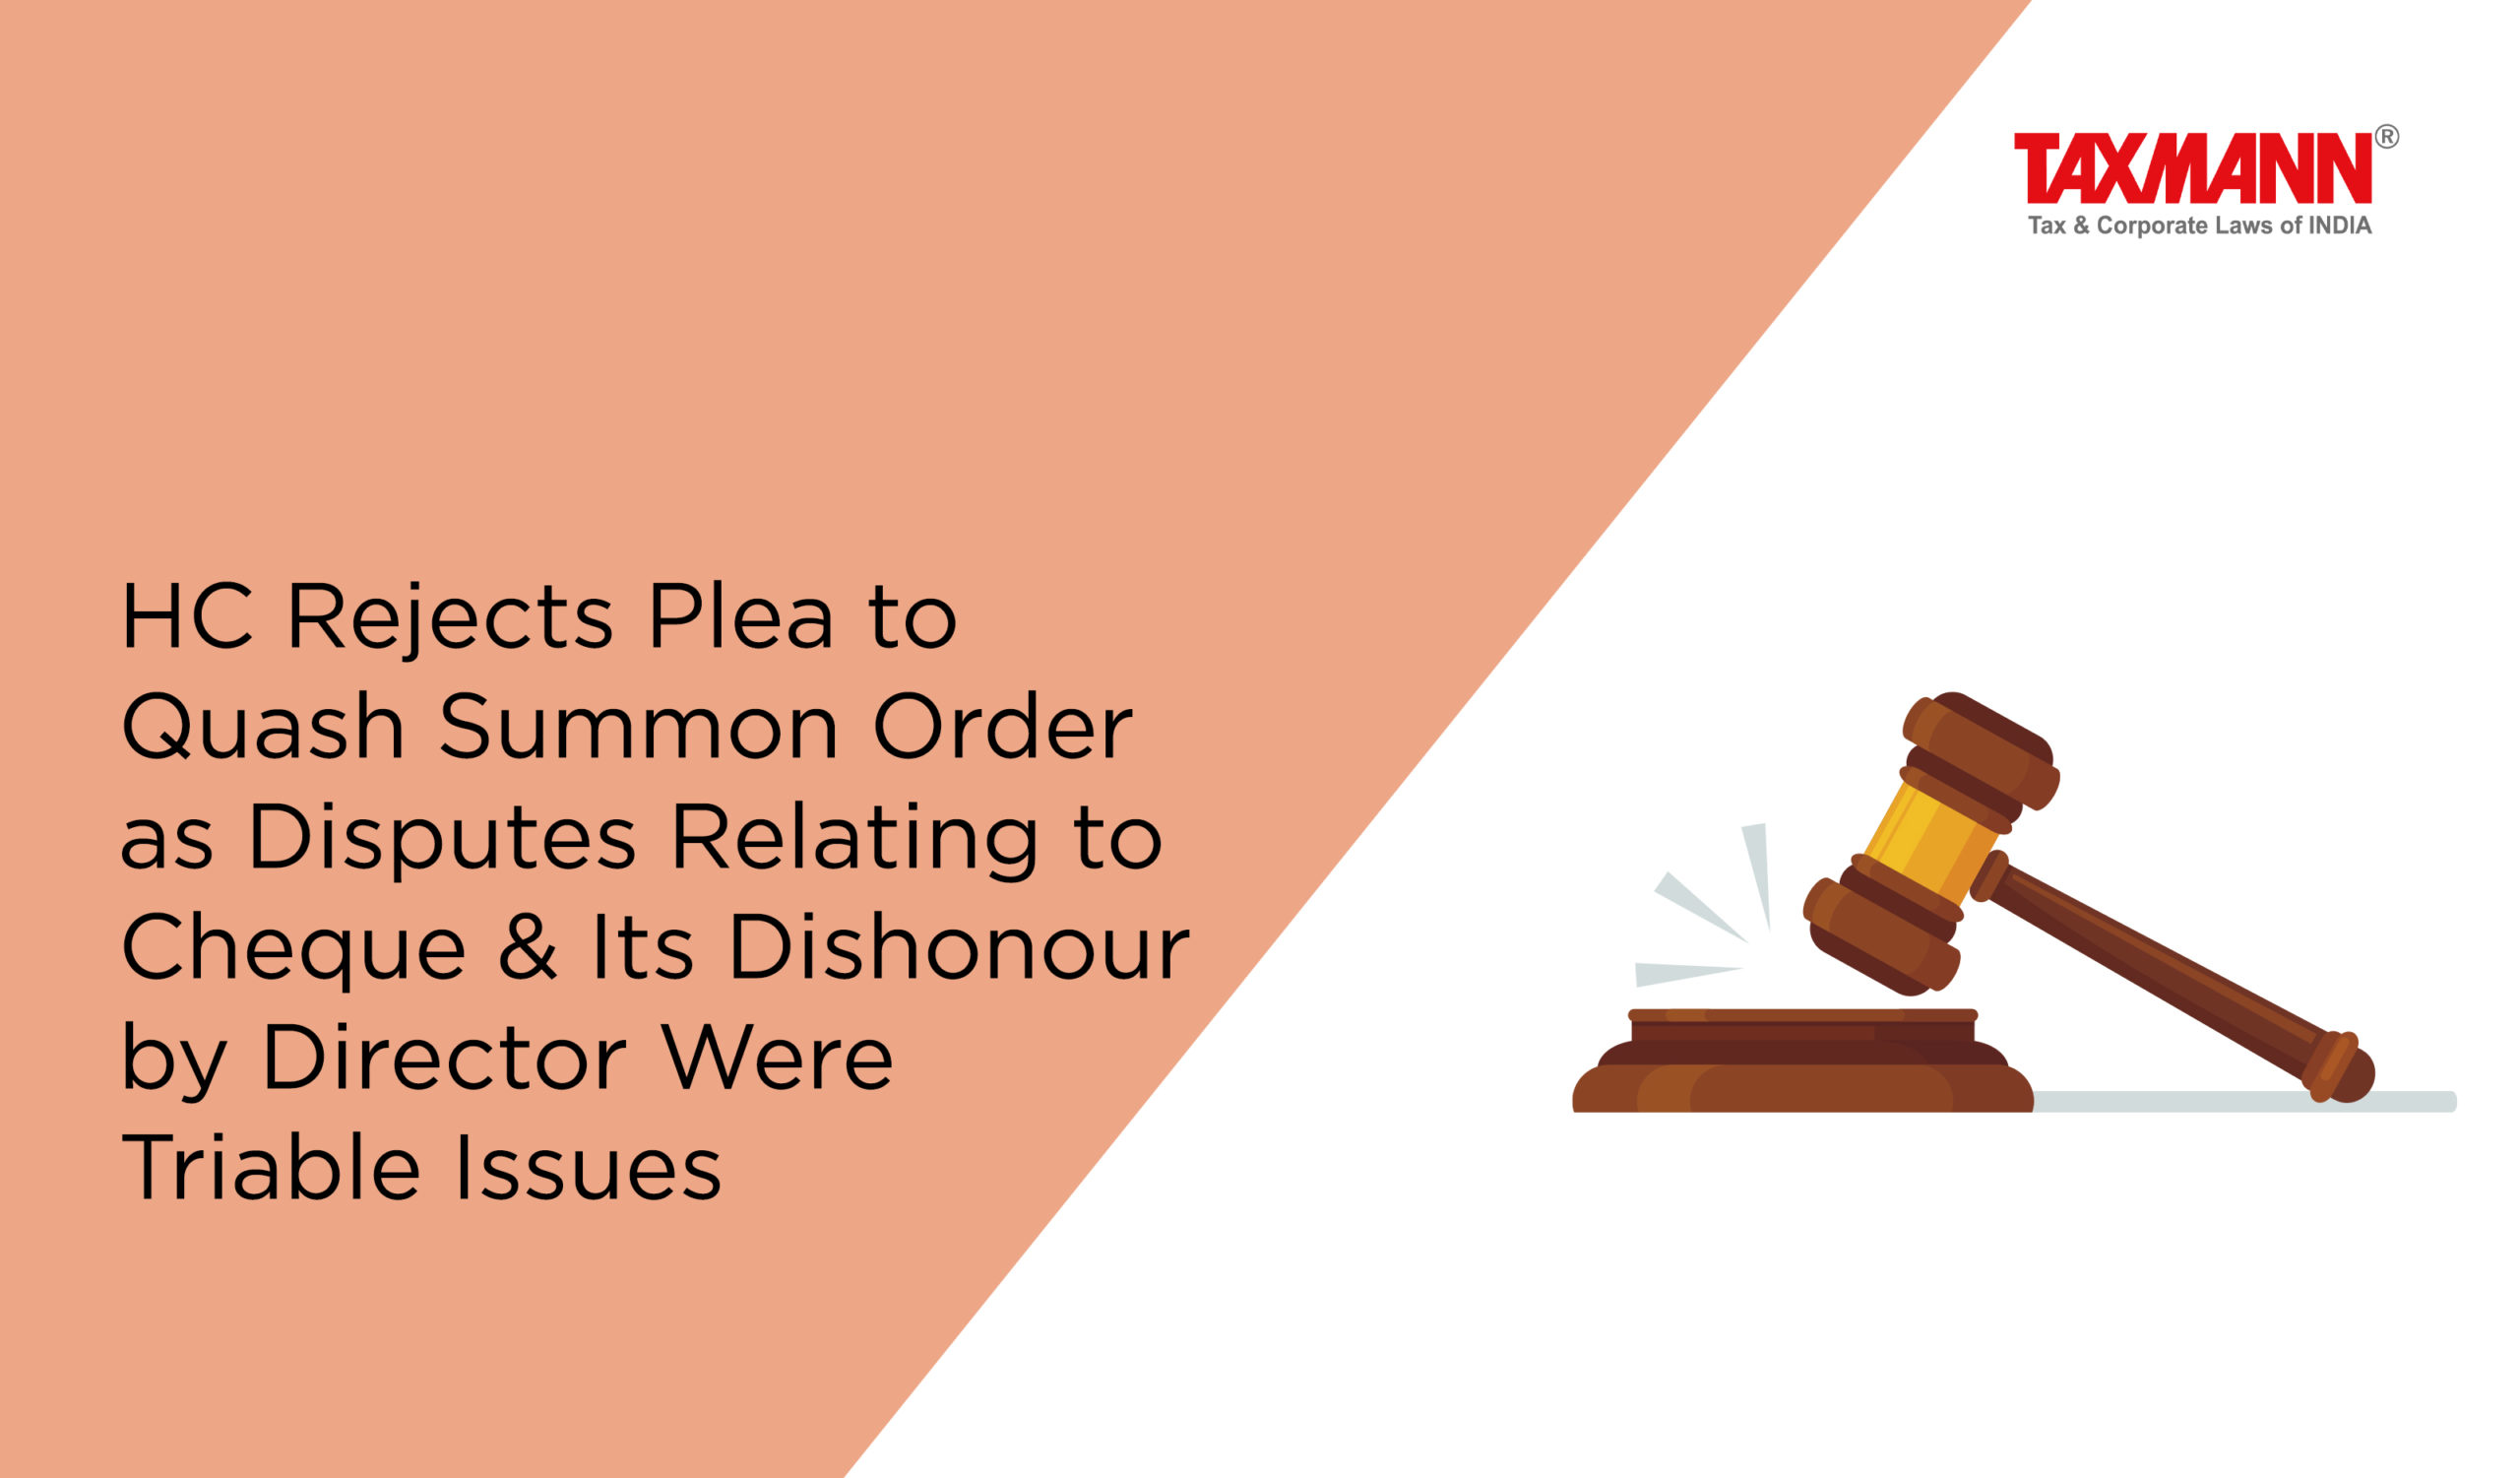 Disputes Relating to Cheque & its Dishonour